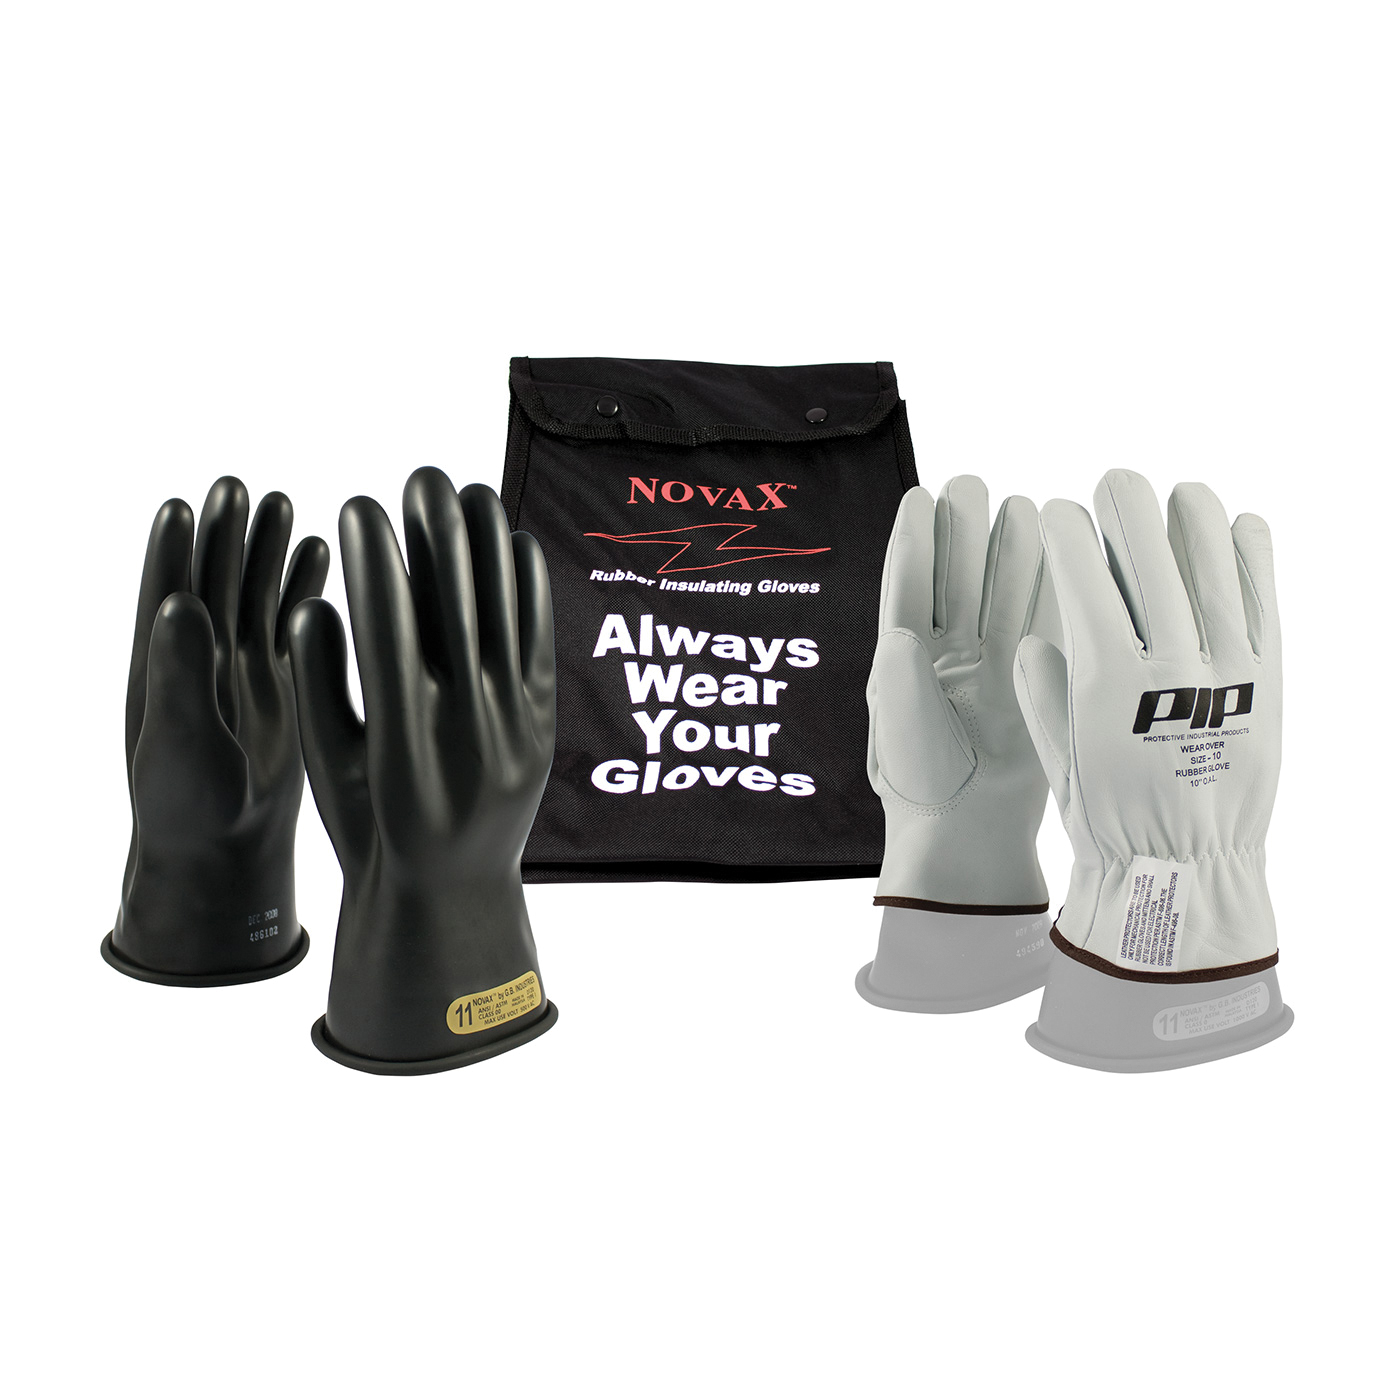 Novax® 150-SK-00/11-KIT Insulating Unisex Electrical Safety Gloves Kit, SZ 11, Goatskin Leather/Natural Rubber, Black/Natural, 11 in L, ASTM Class: Class 00, 500 VAC, 750 VDC Max Use Voltage